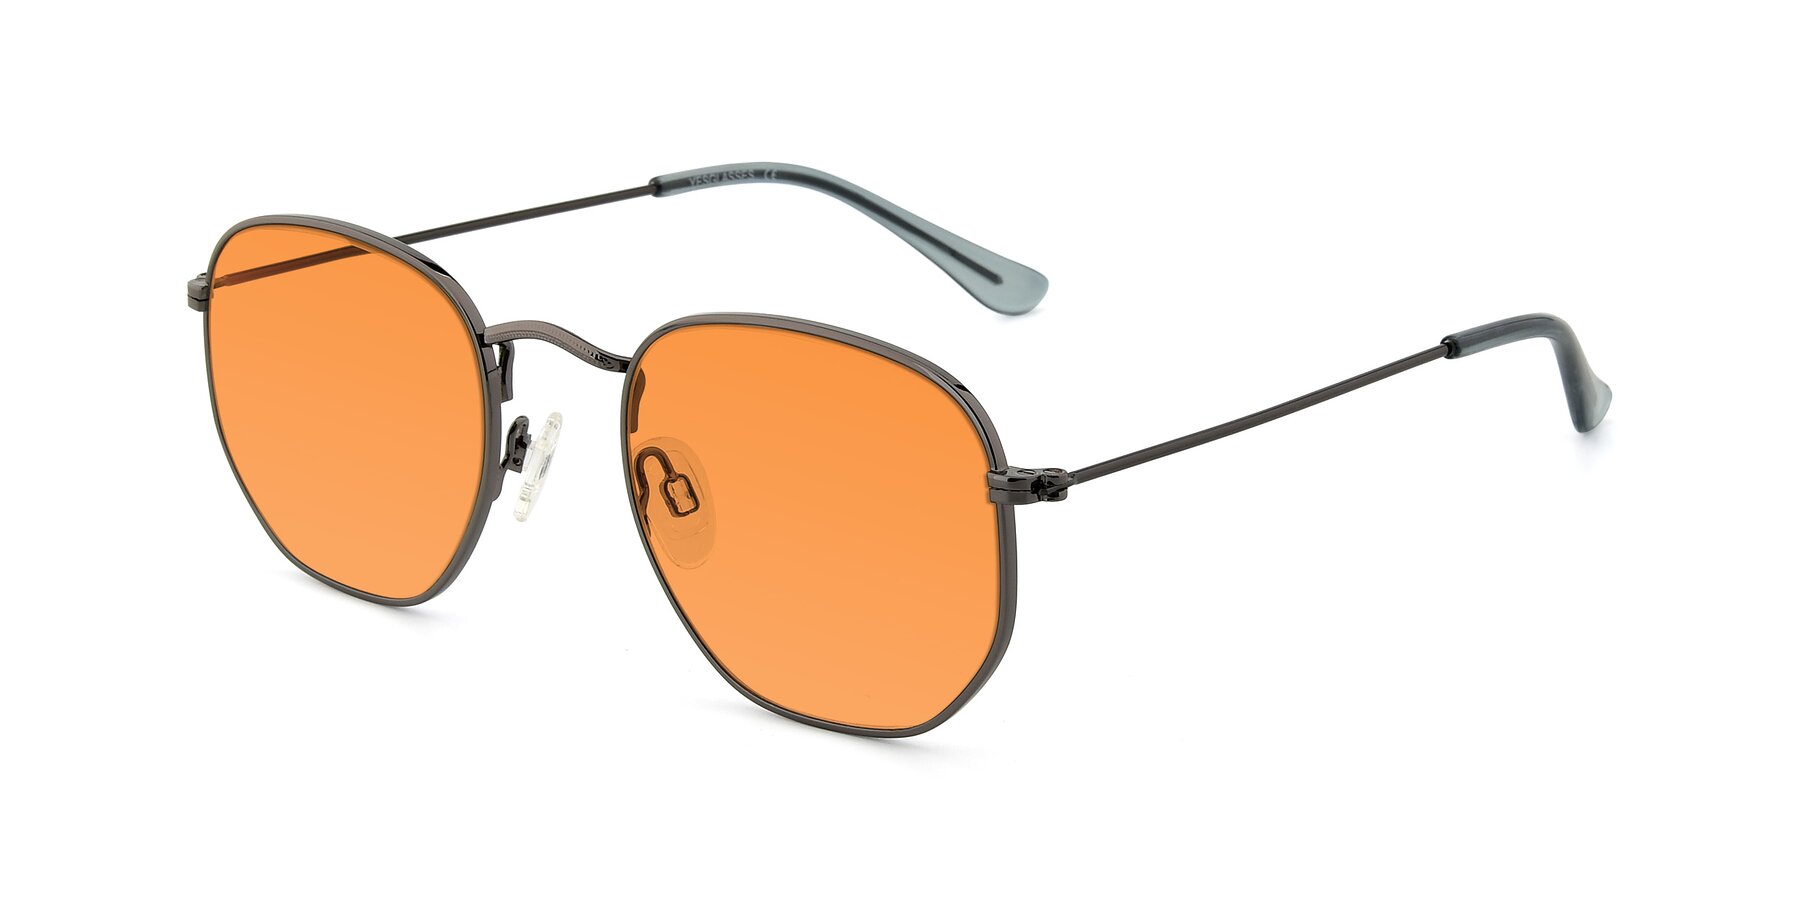 Angle of SSR1943 in Grey with Orange Tinted Lenses